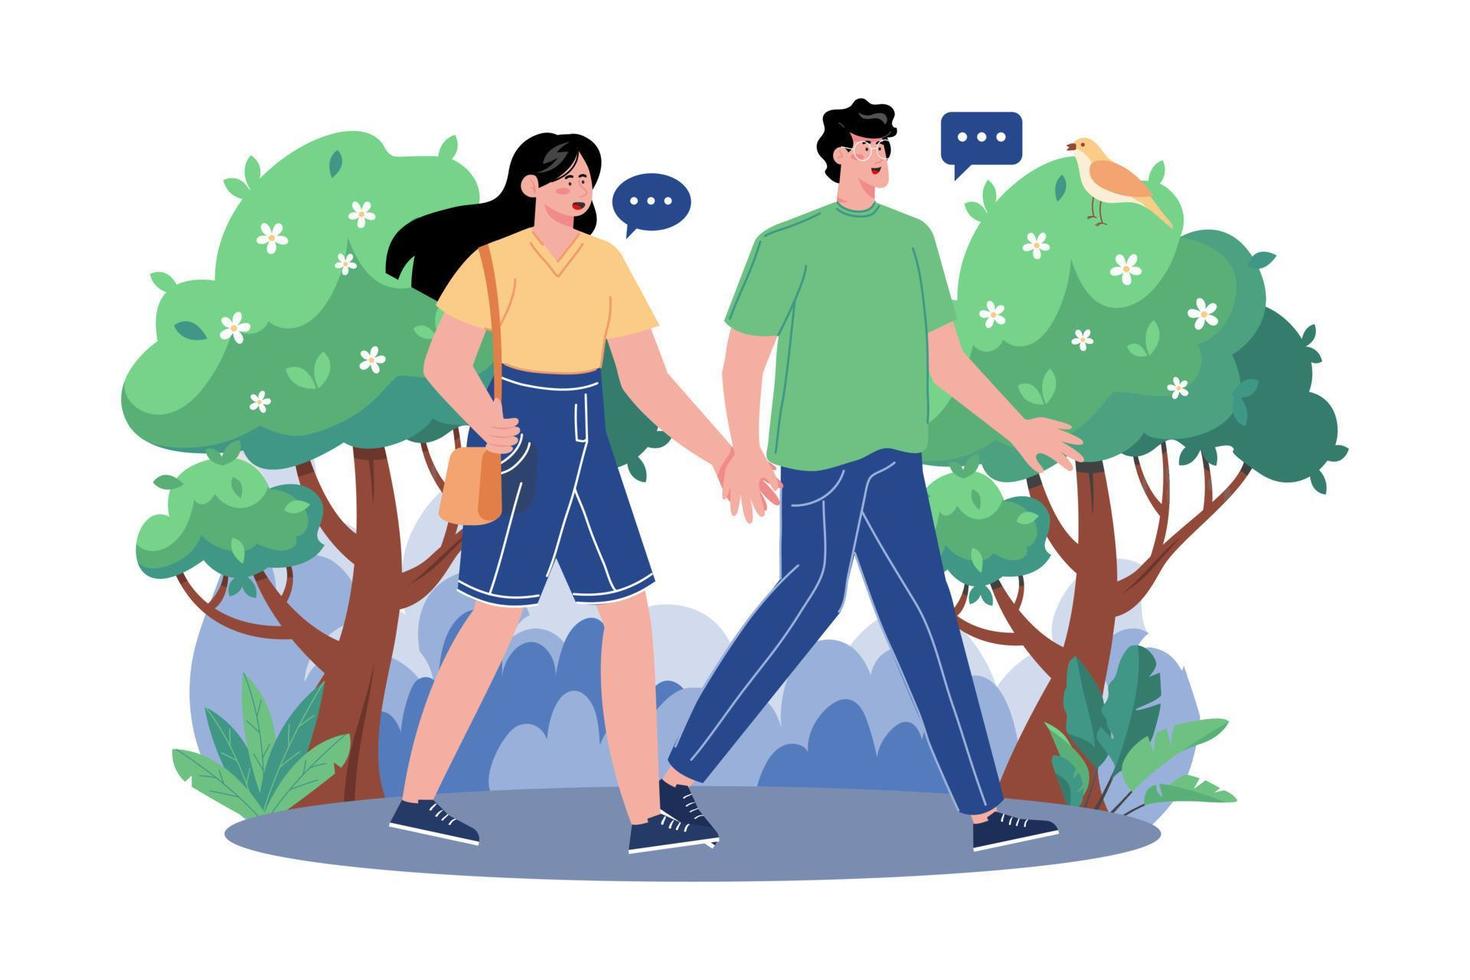 Couple Walking In The Woods Illustration concept on white background vector